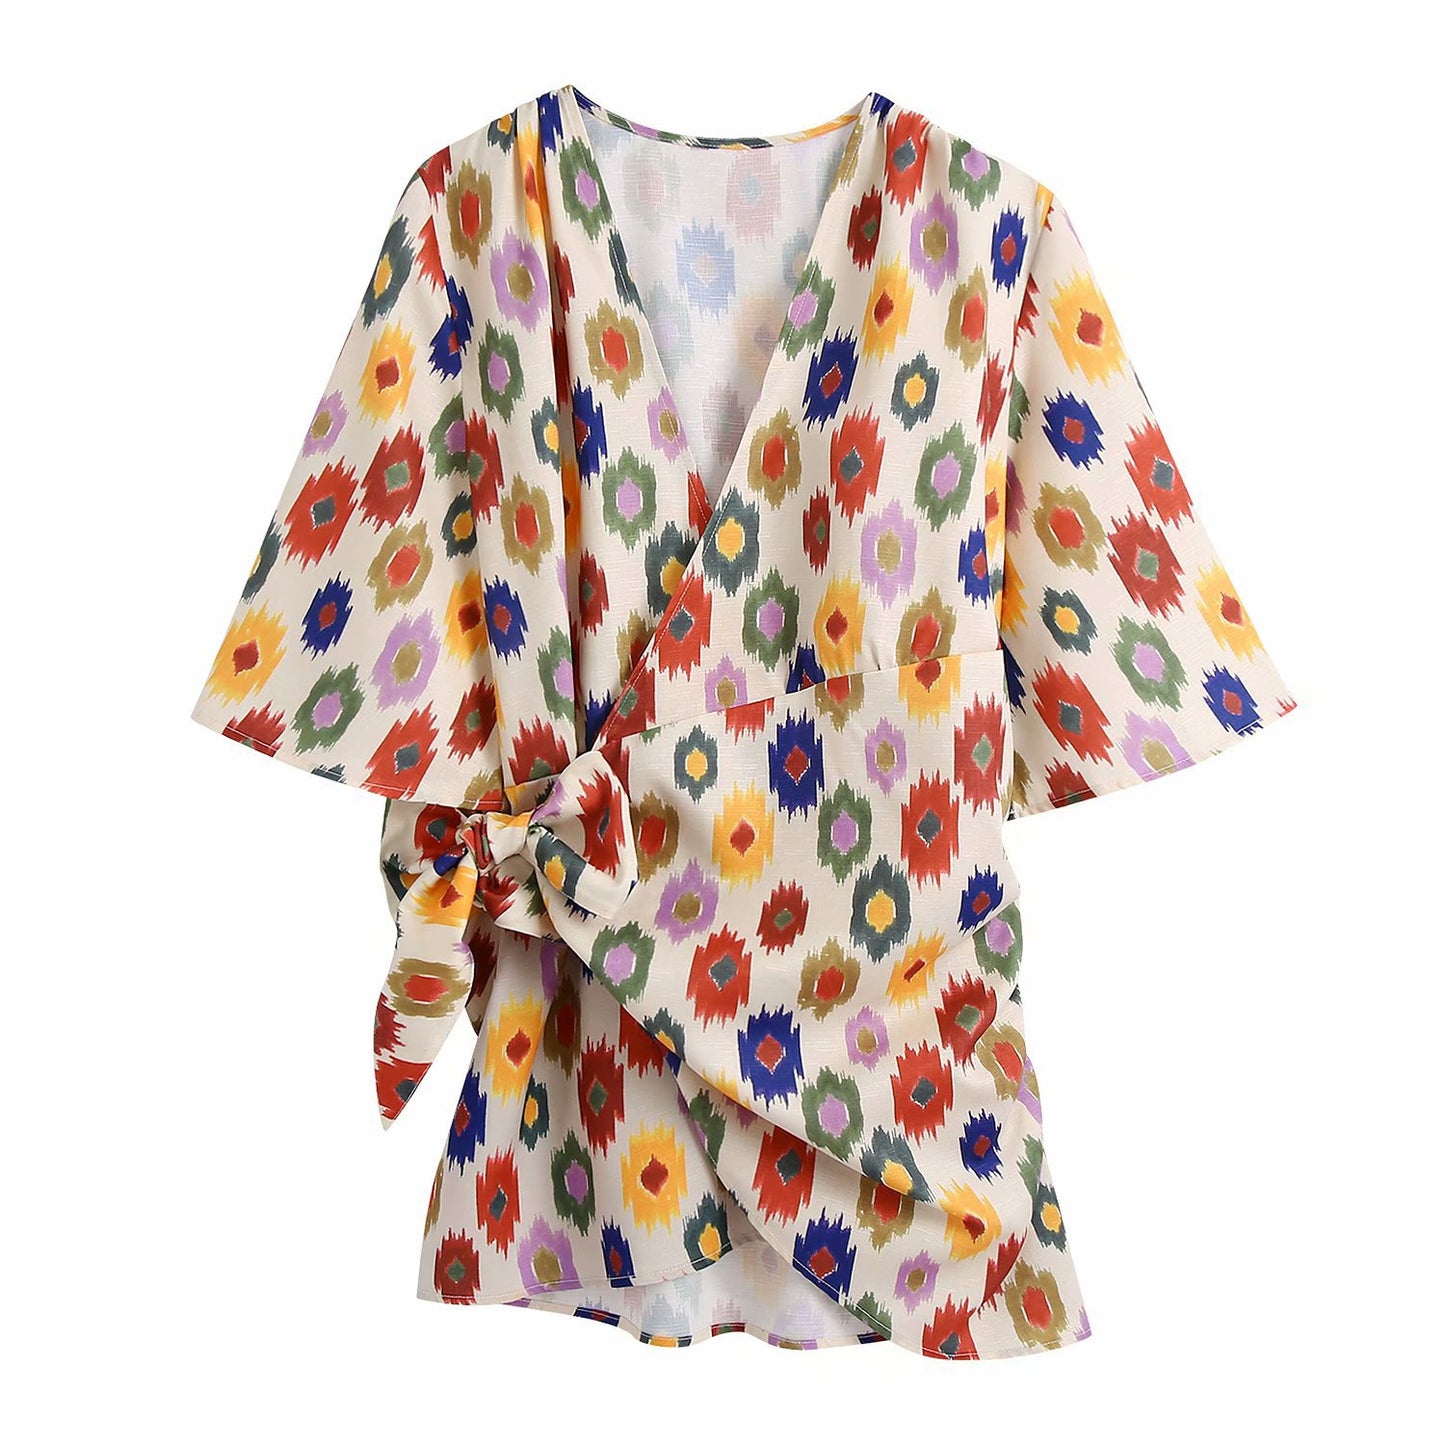 Printed Mini Dress with Mid-Length Sleeves and Wrapped Knotted Detail